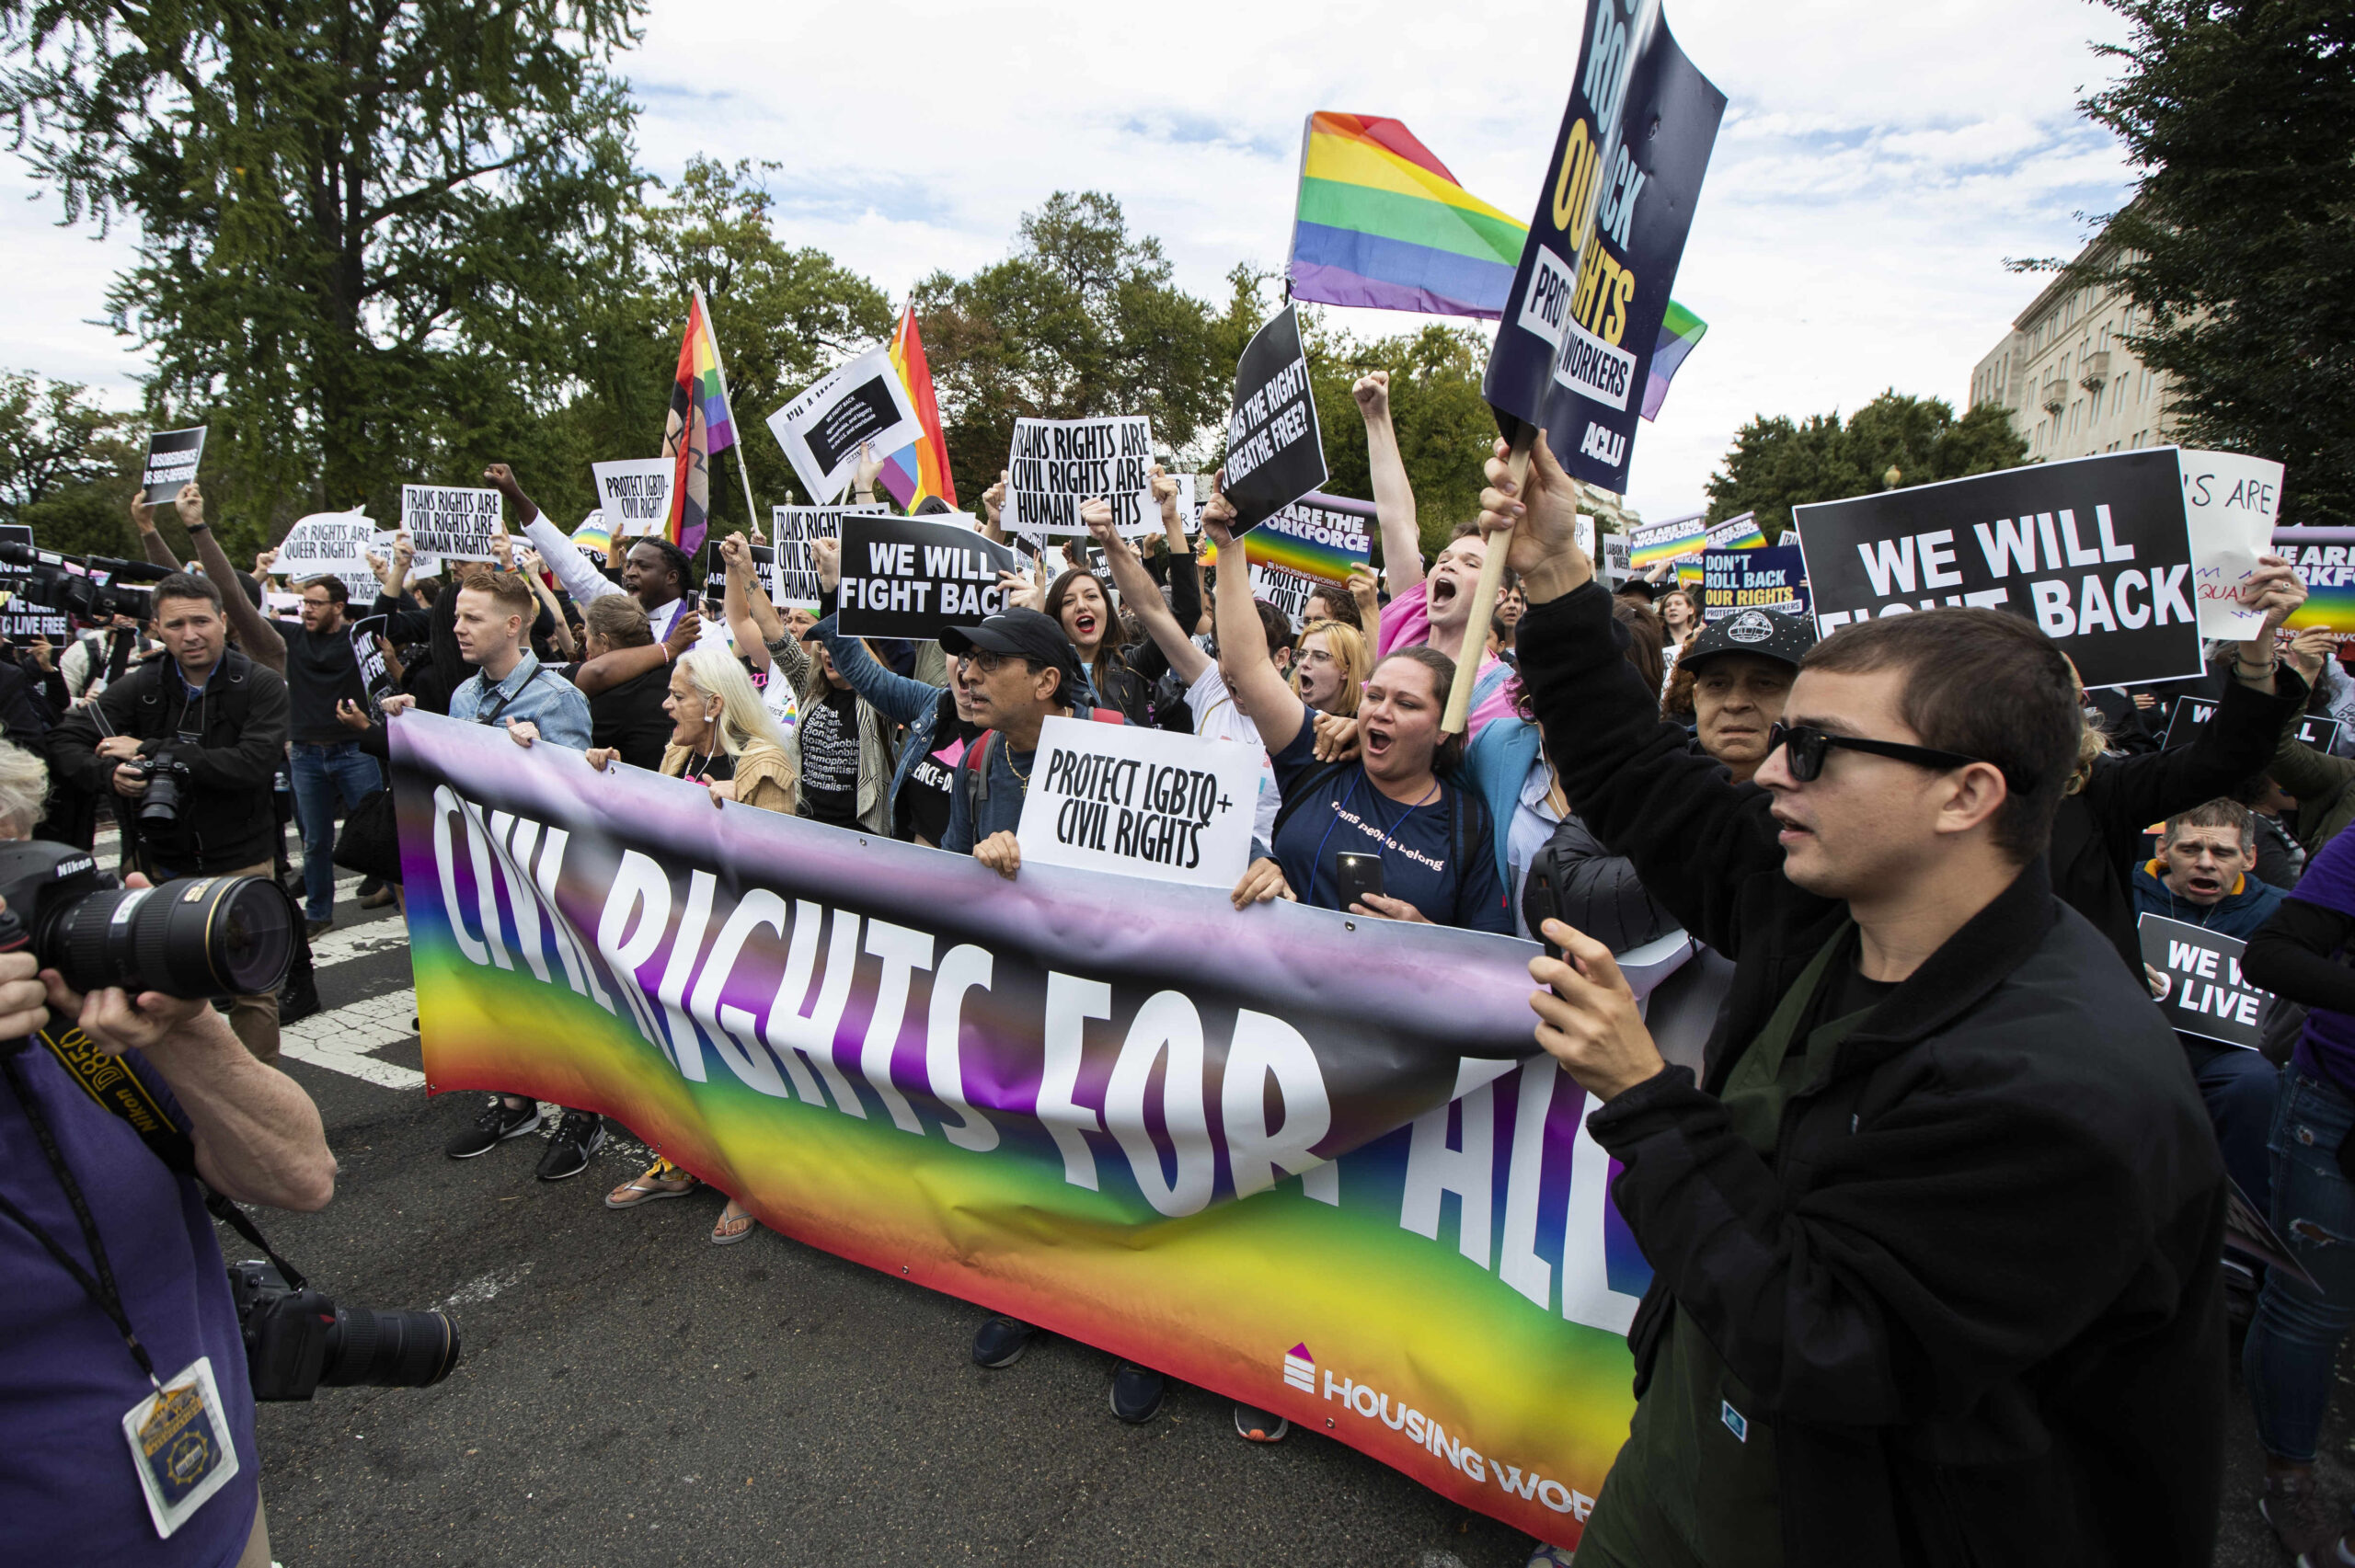 FILE - In this Oct. 8, 2019, photo, supporters of LGBTQ rights stage a protest on the street in front of the U.S. Supreme Court in Washington. A judge in Tennessee on Friday, July 15, 2022, has temporarily barred two federal agencies from enforcing directives issued by President Joe Biden's administration that extended protections for LGBTQ people in schools and workplaces. (AP Photo/Manuel Balce Ceneta, File)